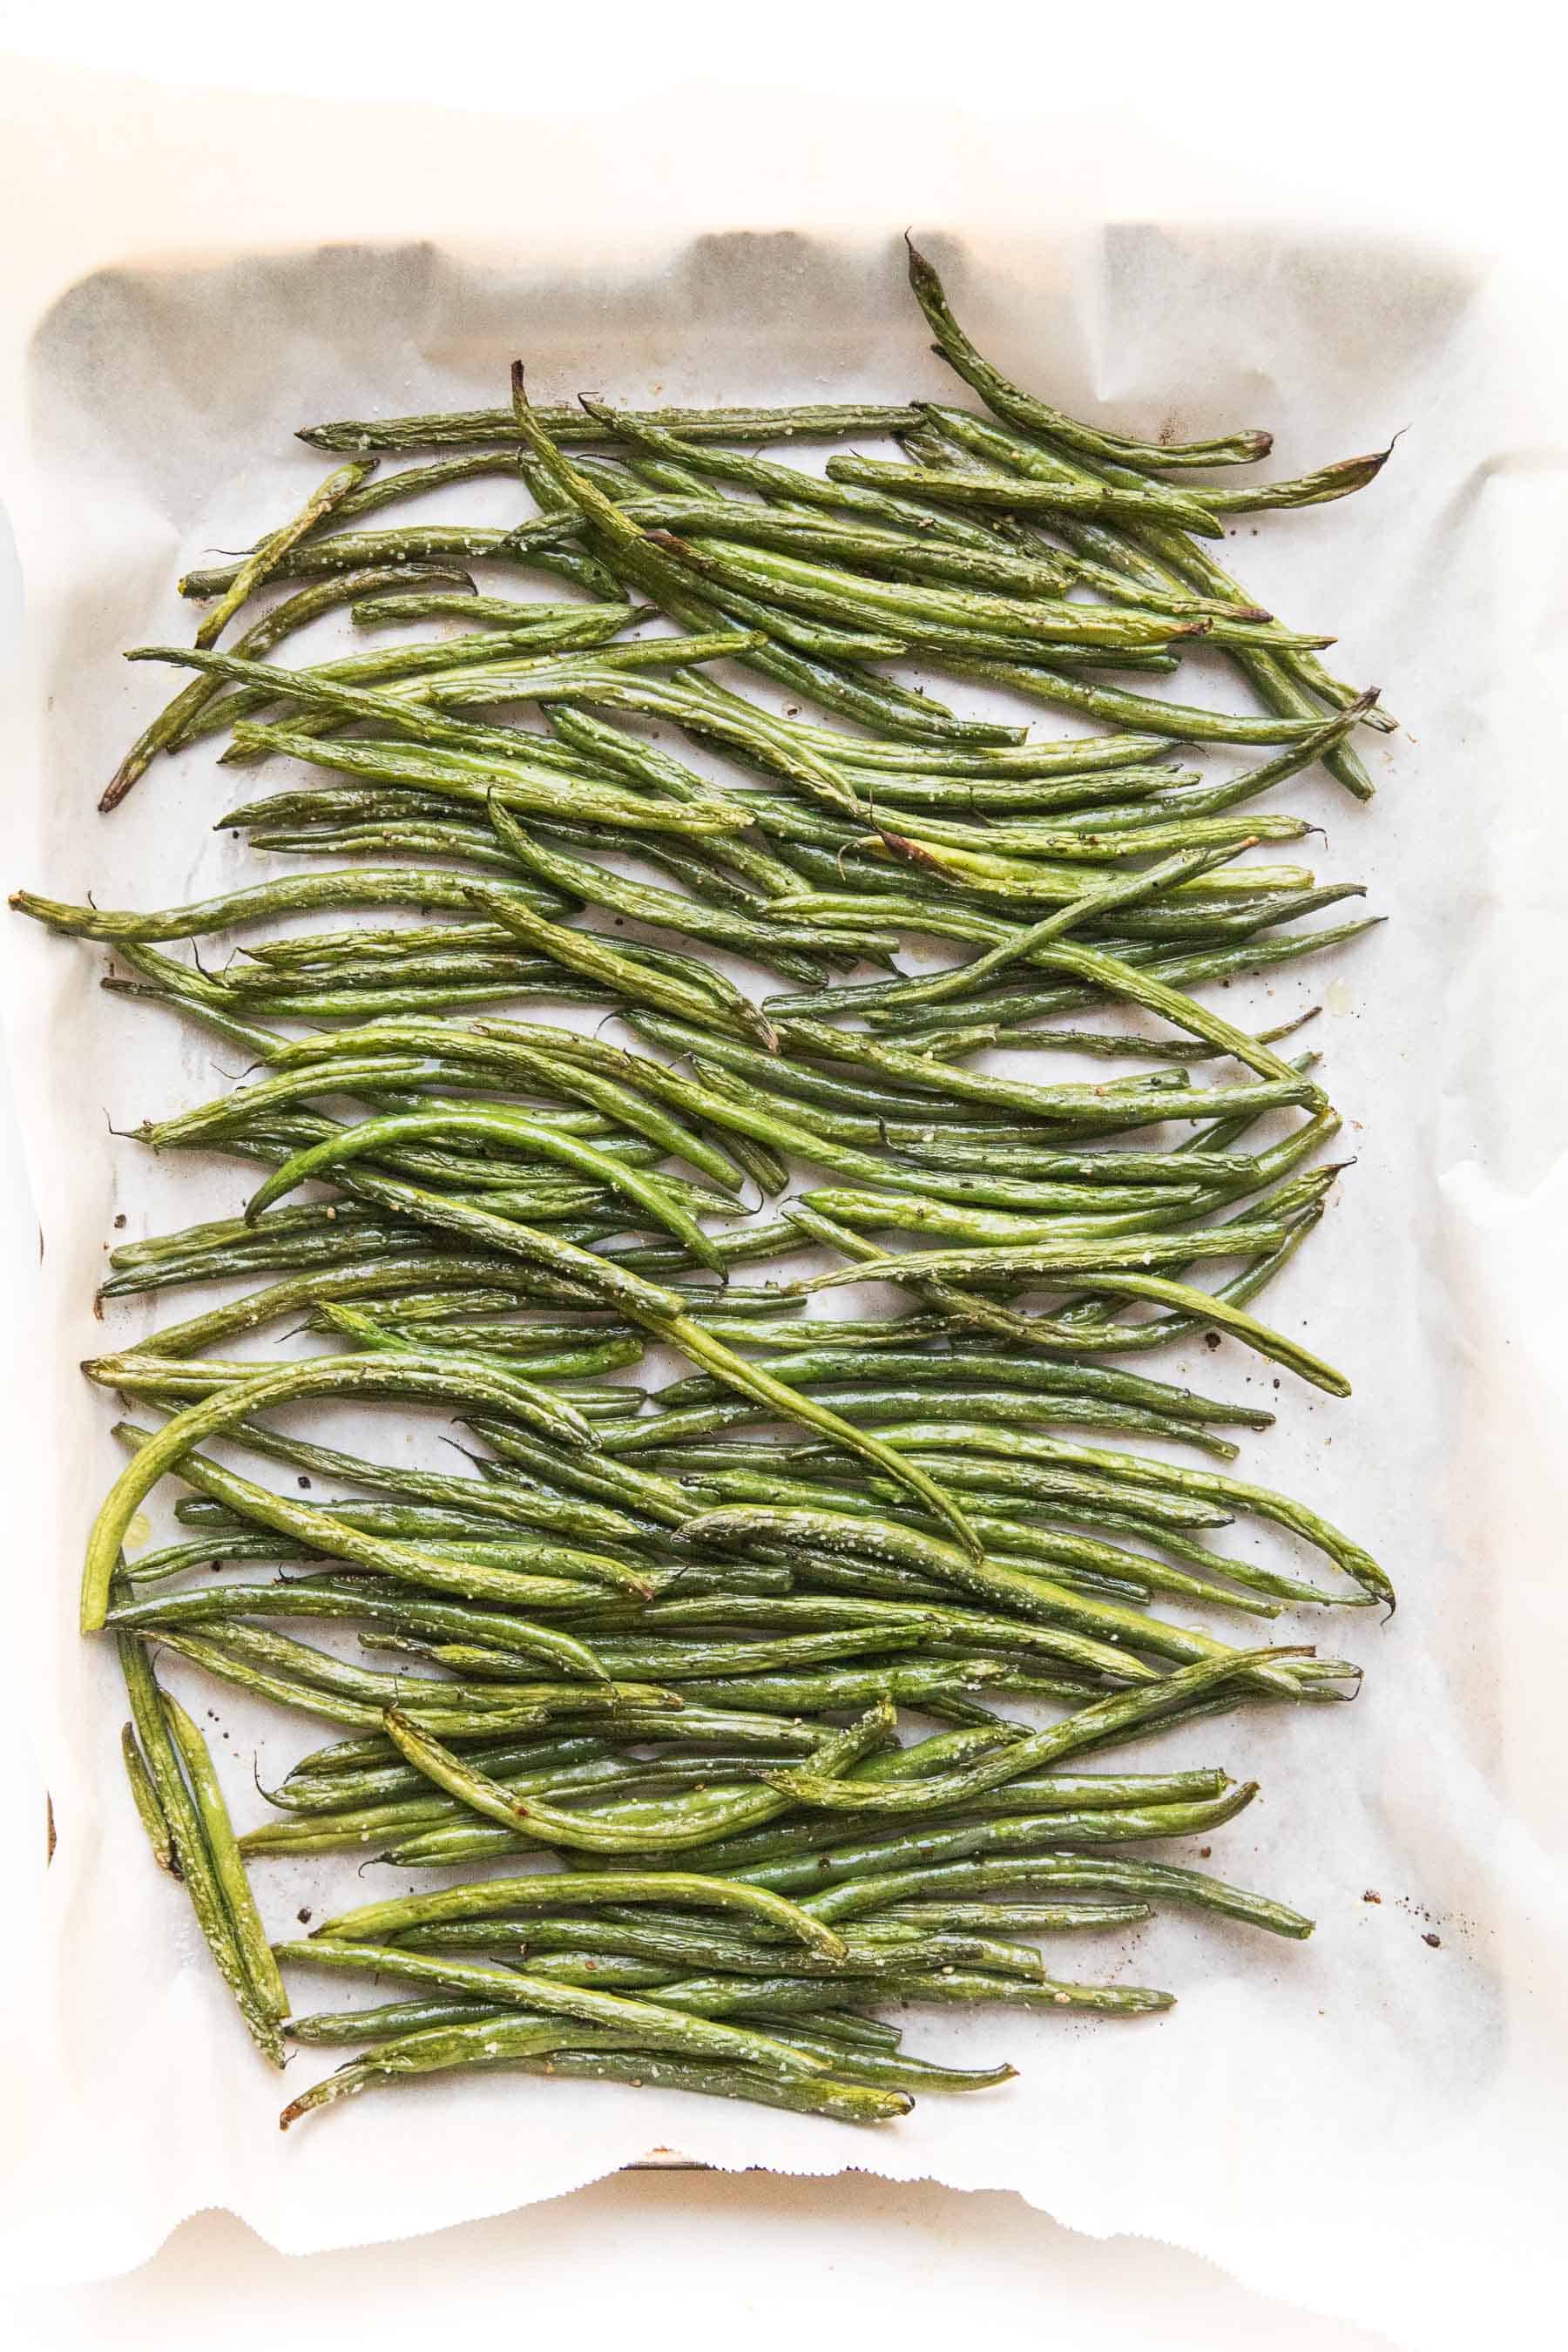 roasted green beans in a rimmed baking sheet